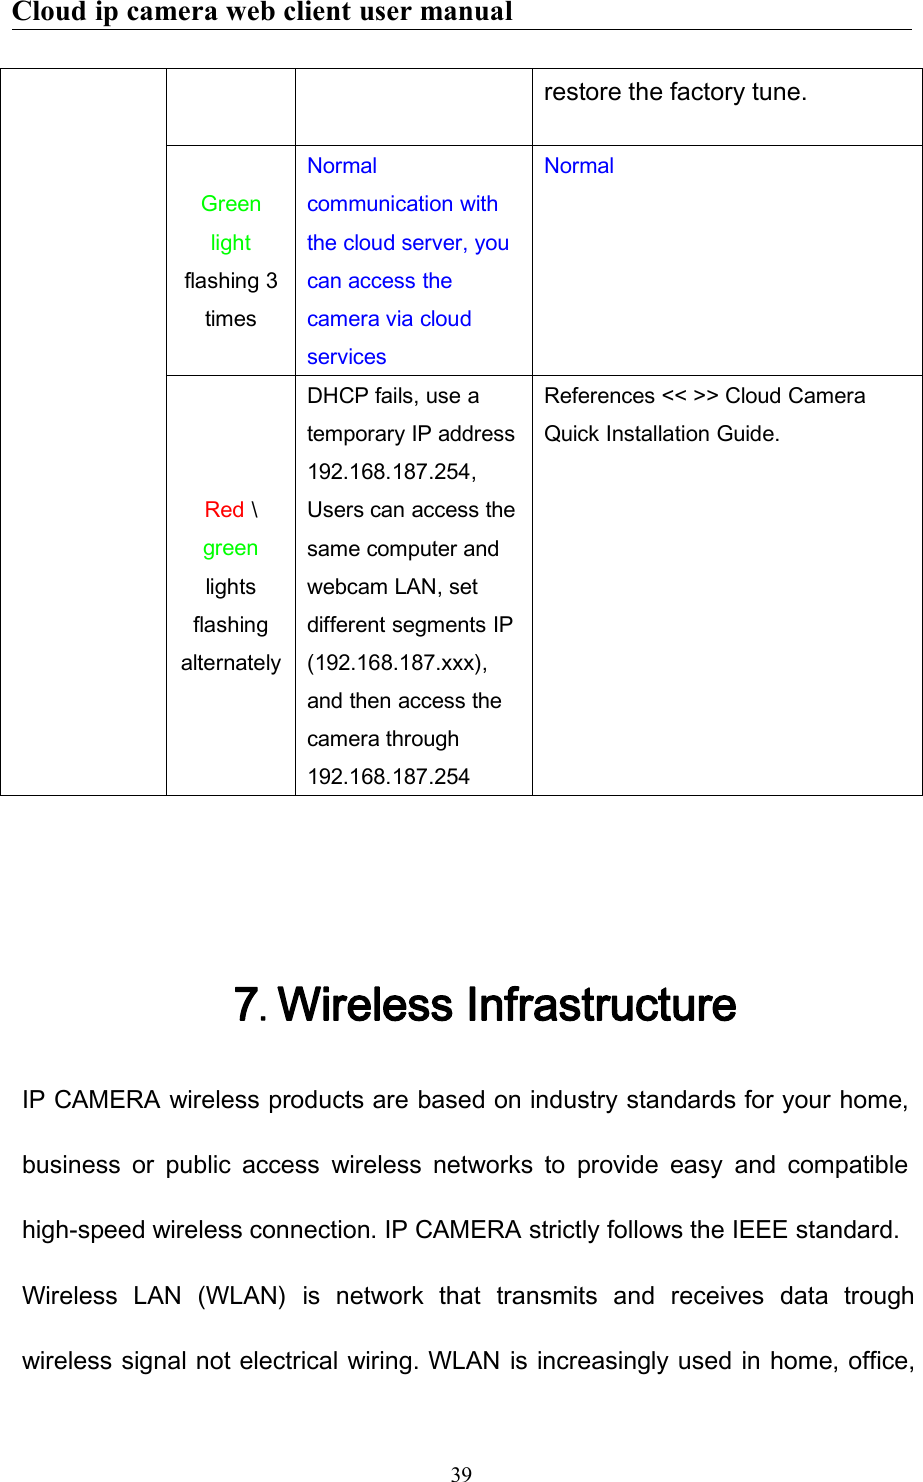 Cloud ip camera web client user manual39restore the factory tune.Greenlightflashing 3timesNormalcommunication withthe cloud server, youcan access thecamera via cloudservicesNormalRed \greenlightsflashingalternatelyDHCP fails, use atemporary IP address192.168.187.254,Users can access thesame computer andwebcam LAN, setdifferent segments IP(192.168.187.xxx),and then access thecamera through192.168.187.254References &lt;&lt; &gt;&gt; Cloud CameraQuick Installation Guide.7.Wireless InfrastructureIP CAMERA wireless products are based on industry standards for your home,business or public access wireless networks to provide easy and compatiblehigh-speed wireless connection. IP CAMERA strictly follows the IEEE standard.Wireless LAN (WLAN) is network that transmits and receives data troughwireless signal not electrical wiring. WLAN is increasingly used in home, office,